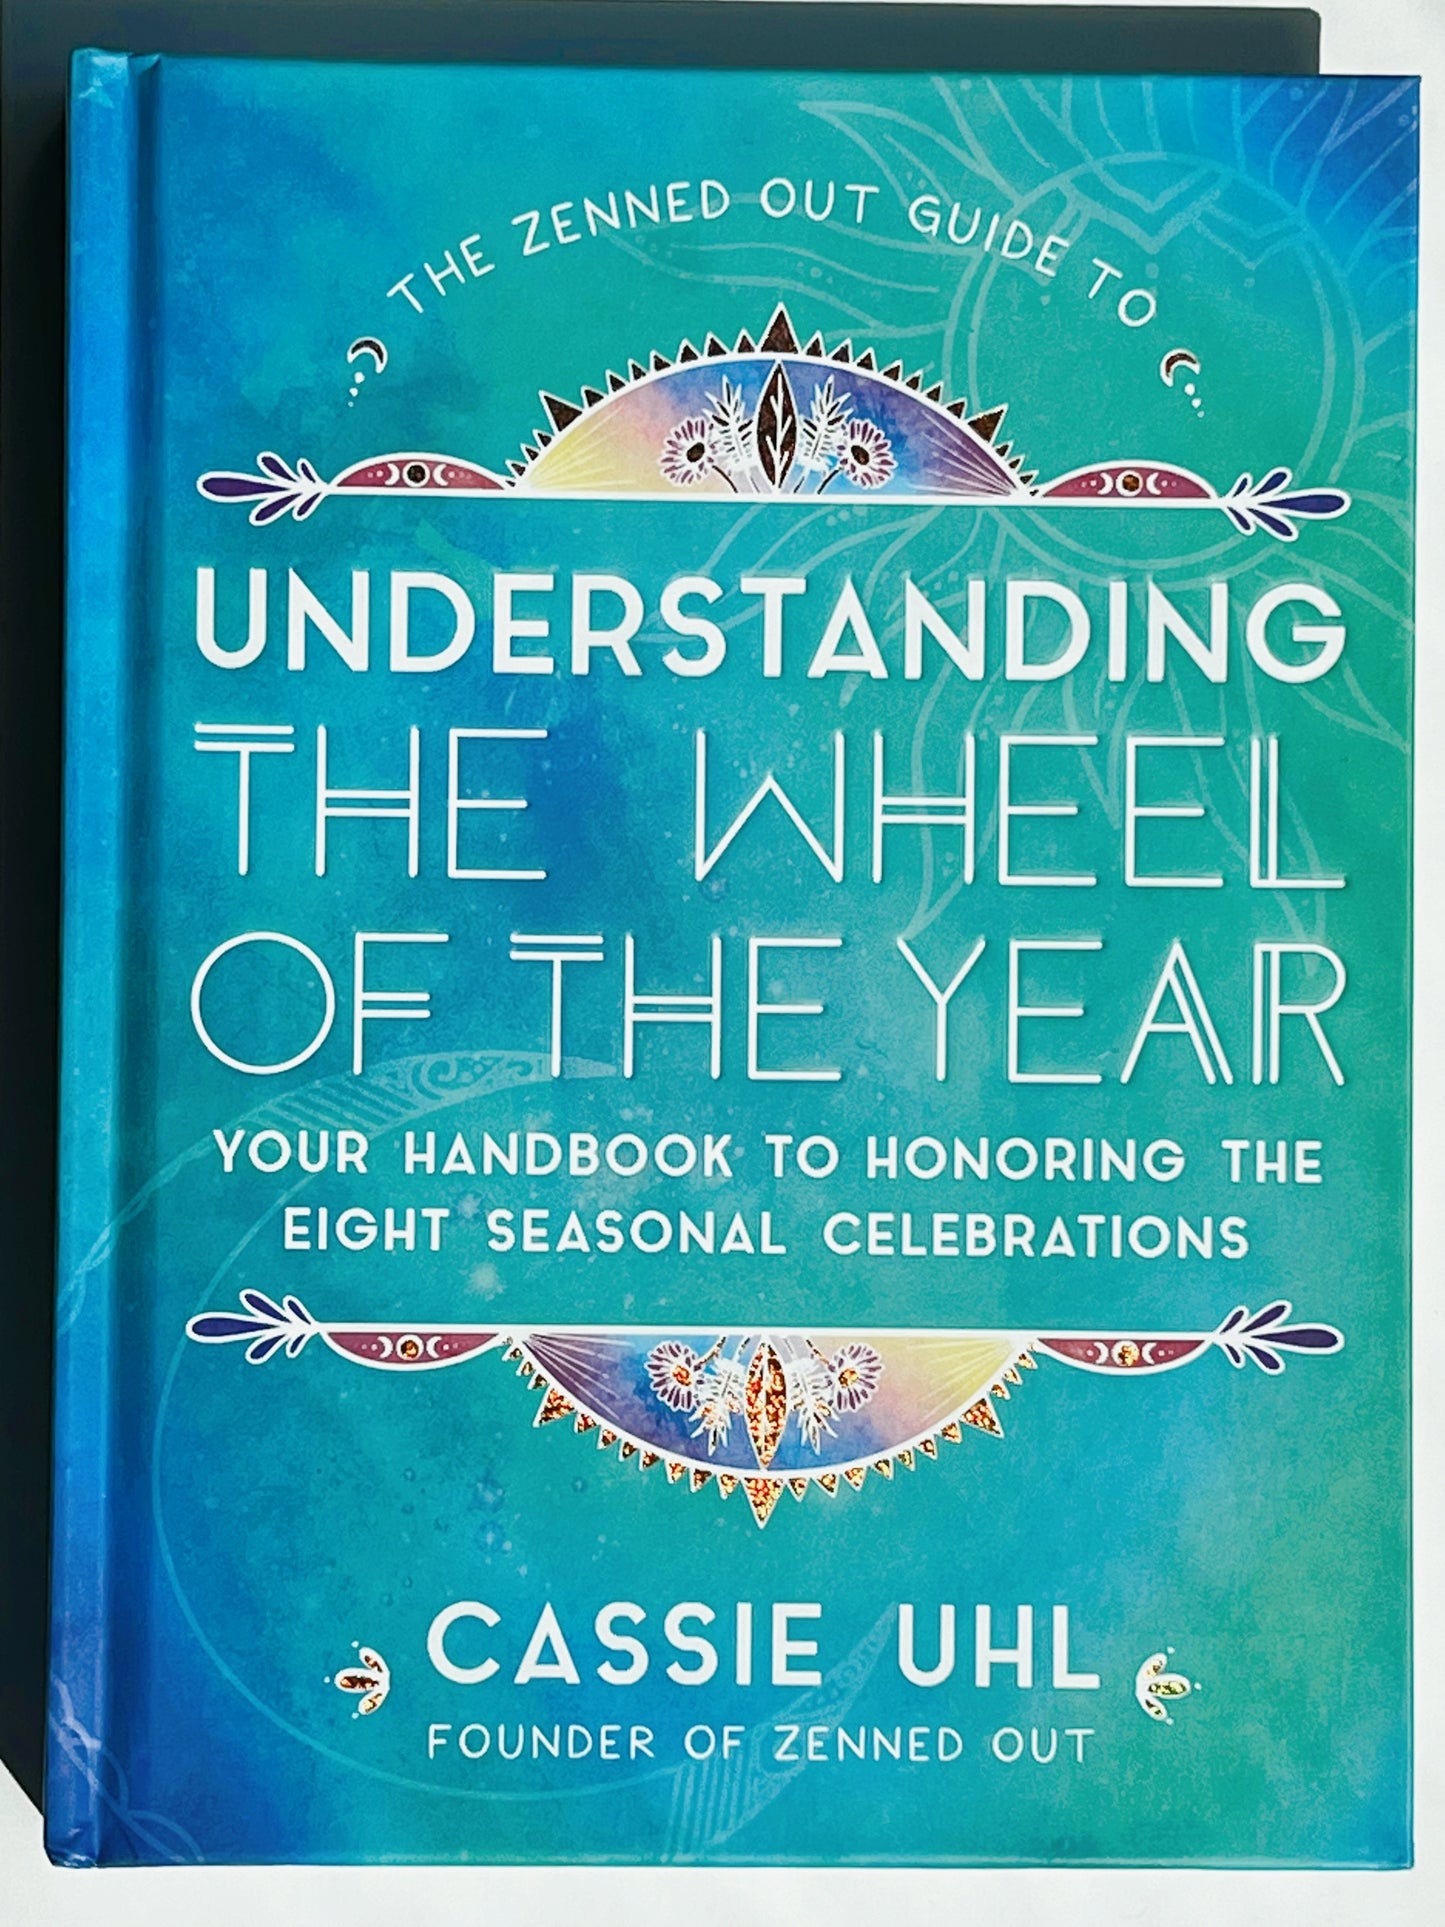 The Zenned Out Guide to Understanding the Wheel of the Year: Your Handbook to Honoring the Eight Seasonal Celebrations Hardcover